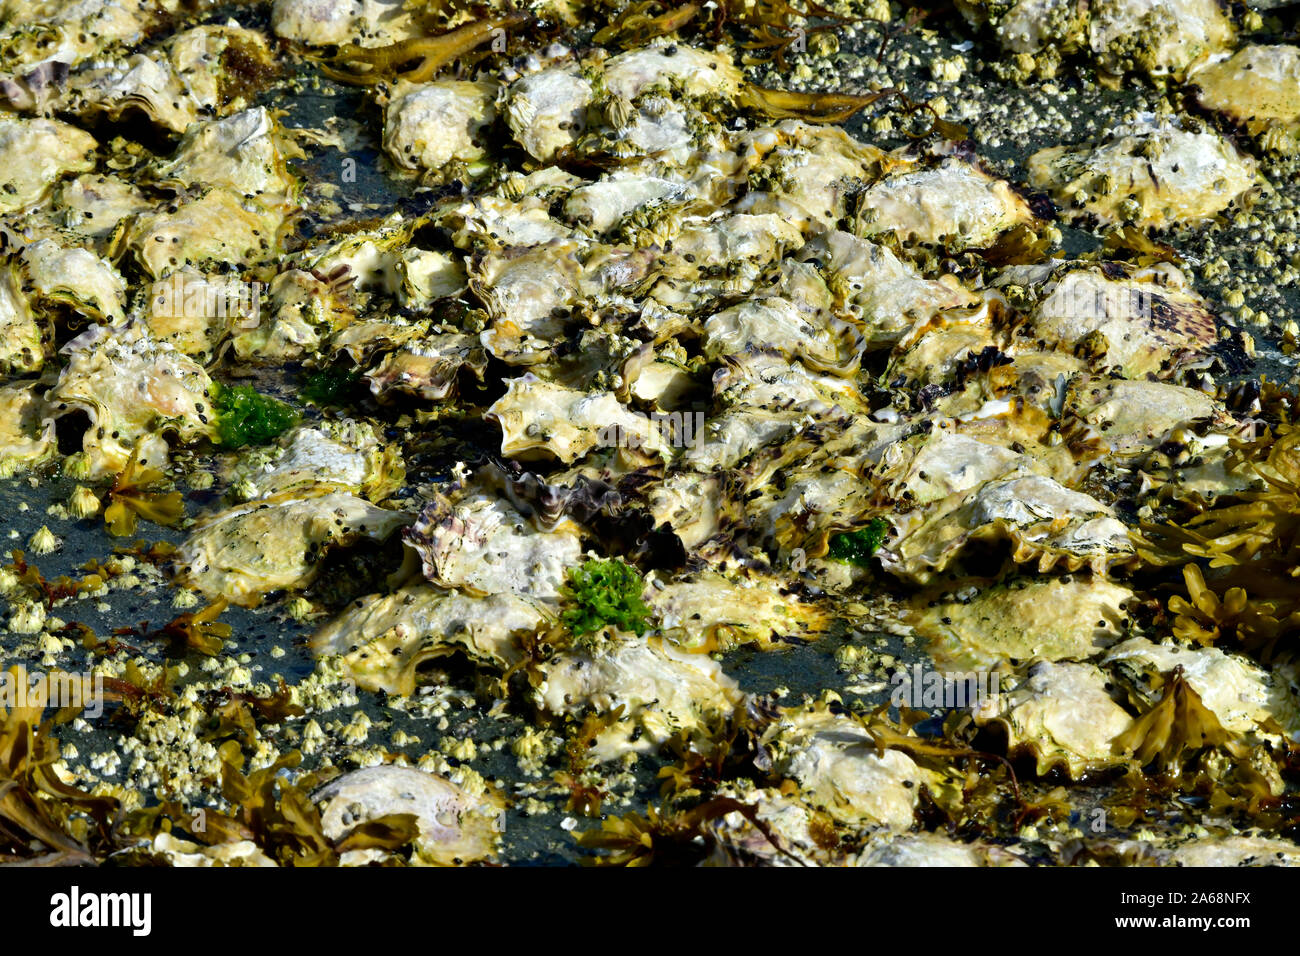 A bed of wild oysters clinging to a rocky shore on Vancouver Island British Columbia Canada Stock Photo